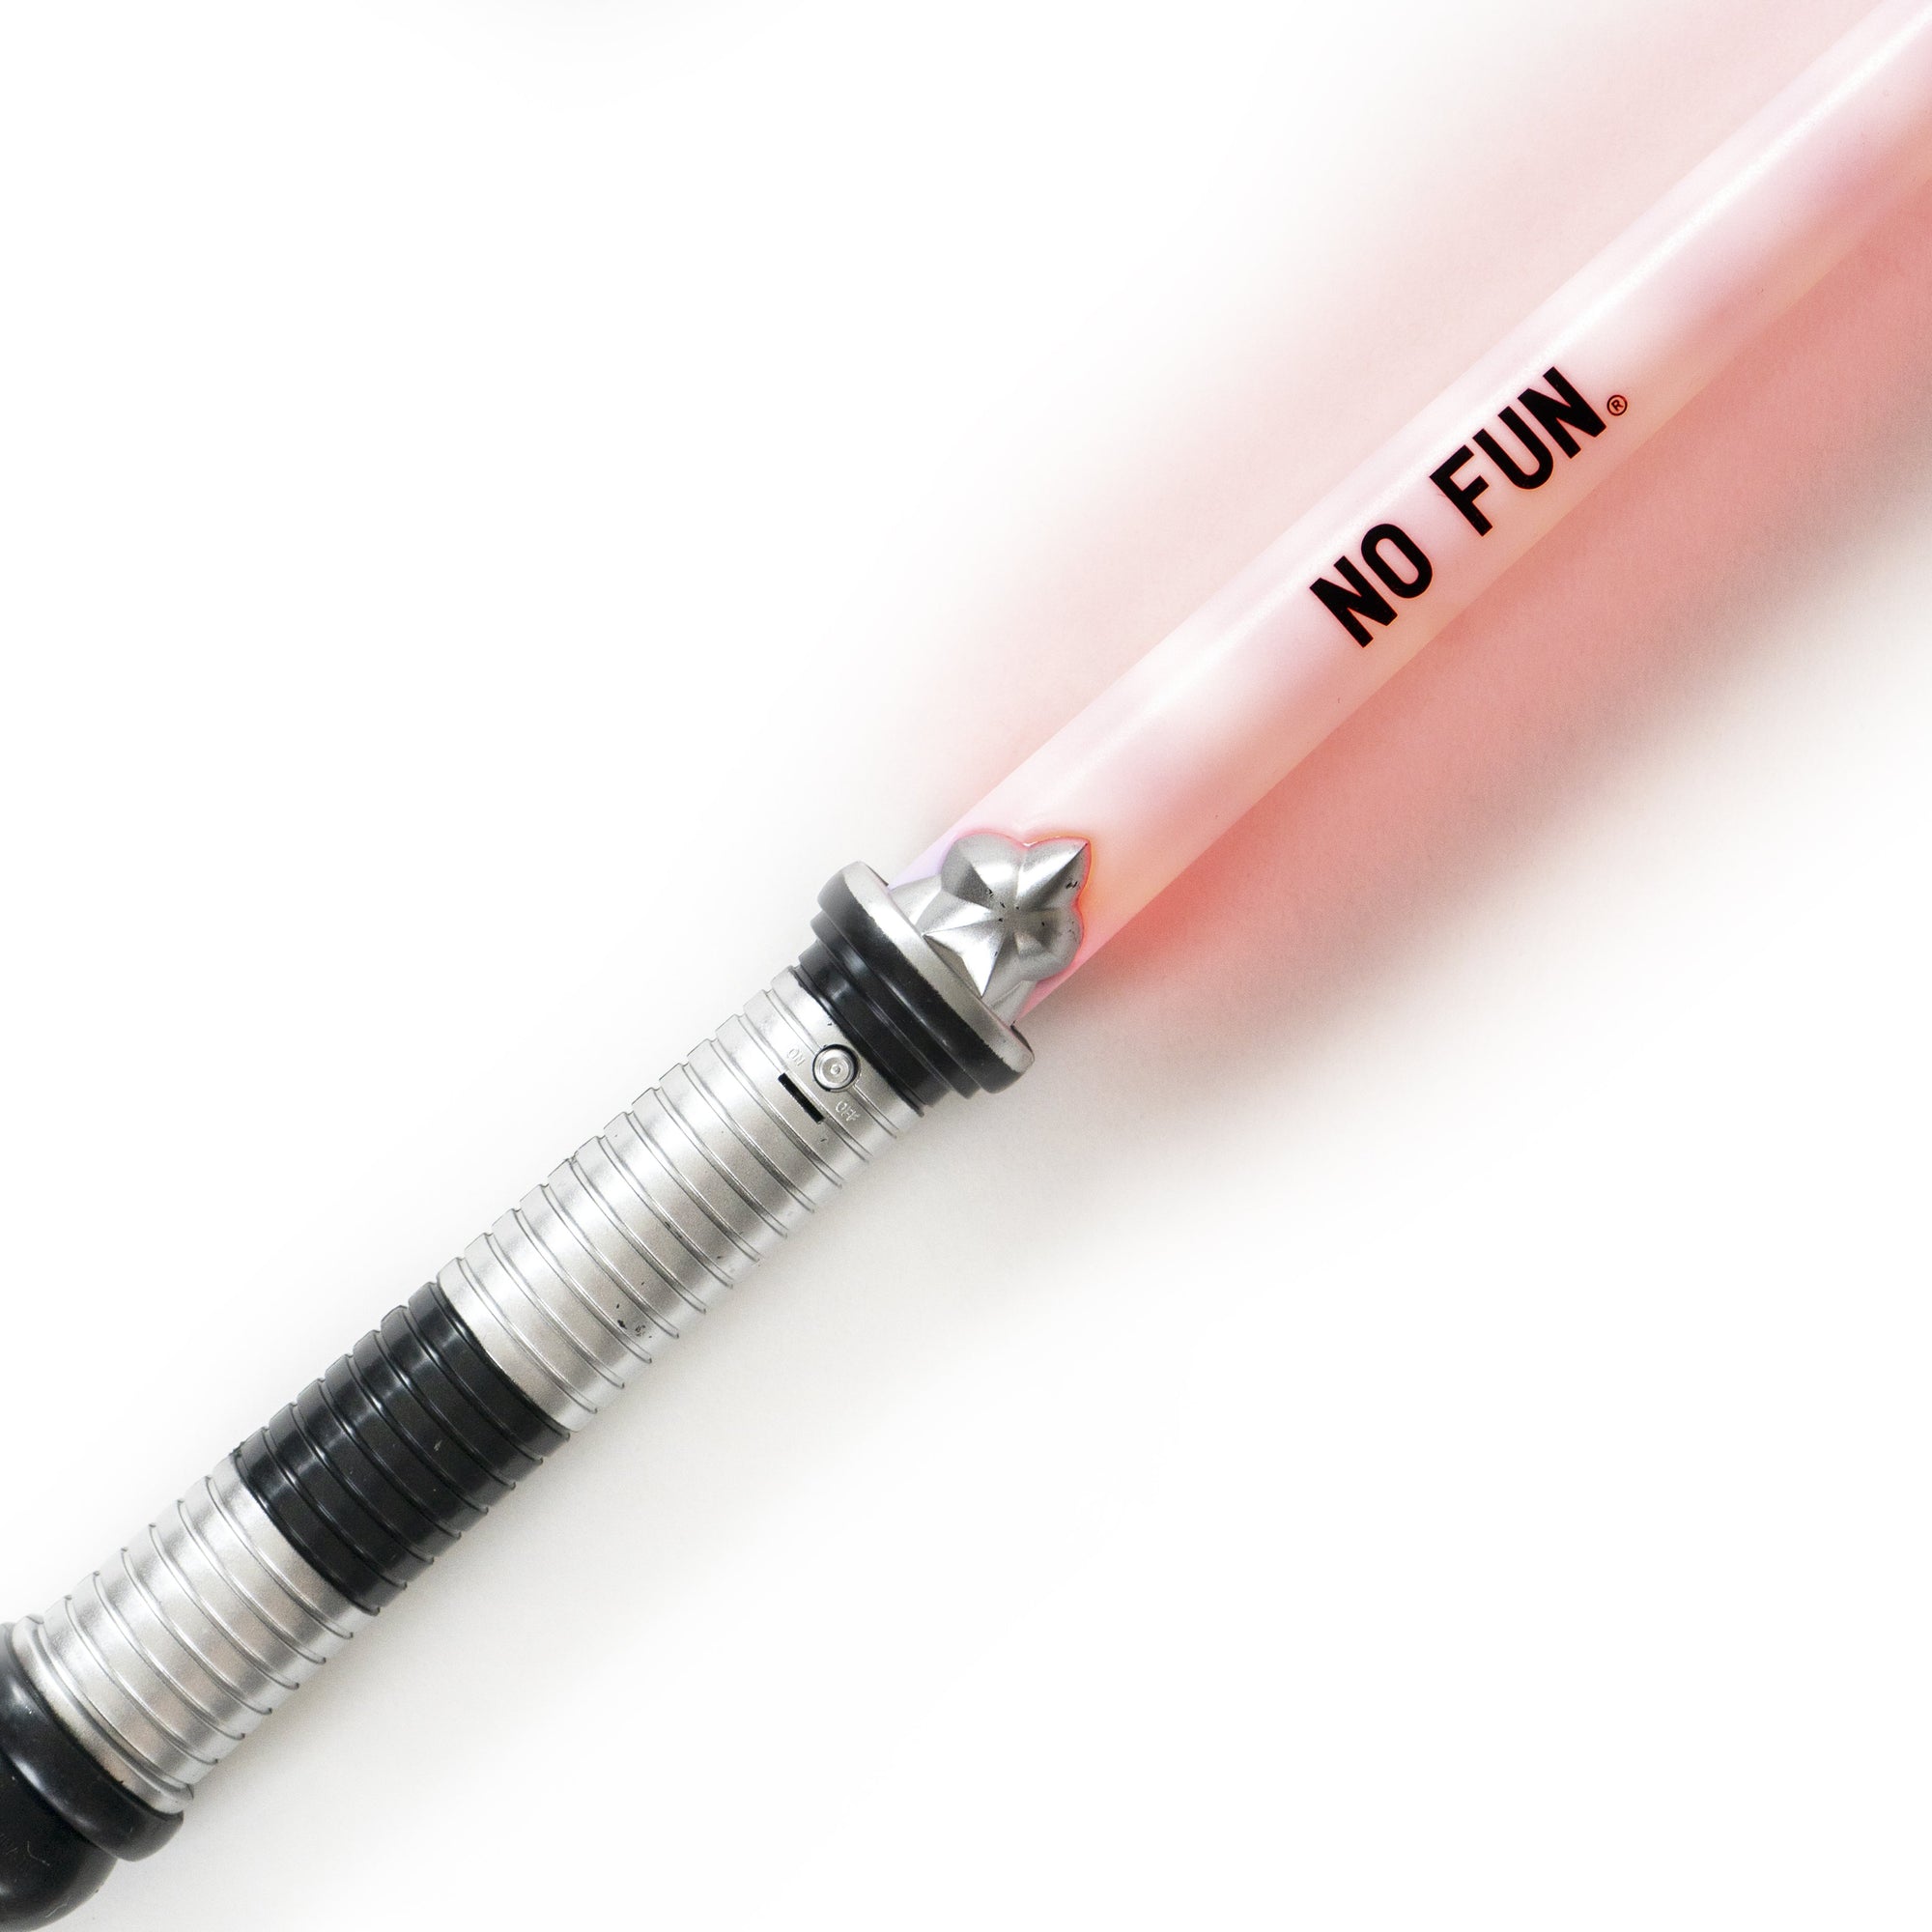 A close up photo of a light up novelty sword glowing red on a white background. Near the handle is a Black "NO FUN®" logo."